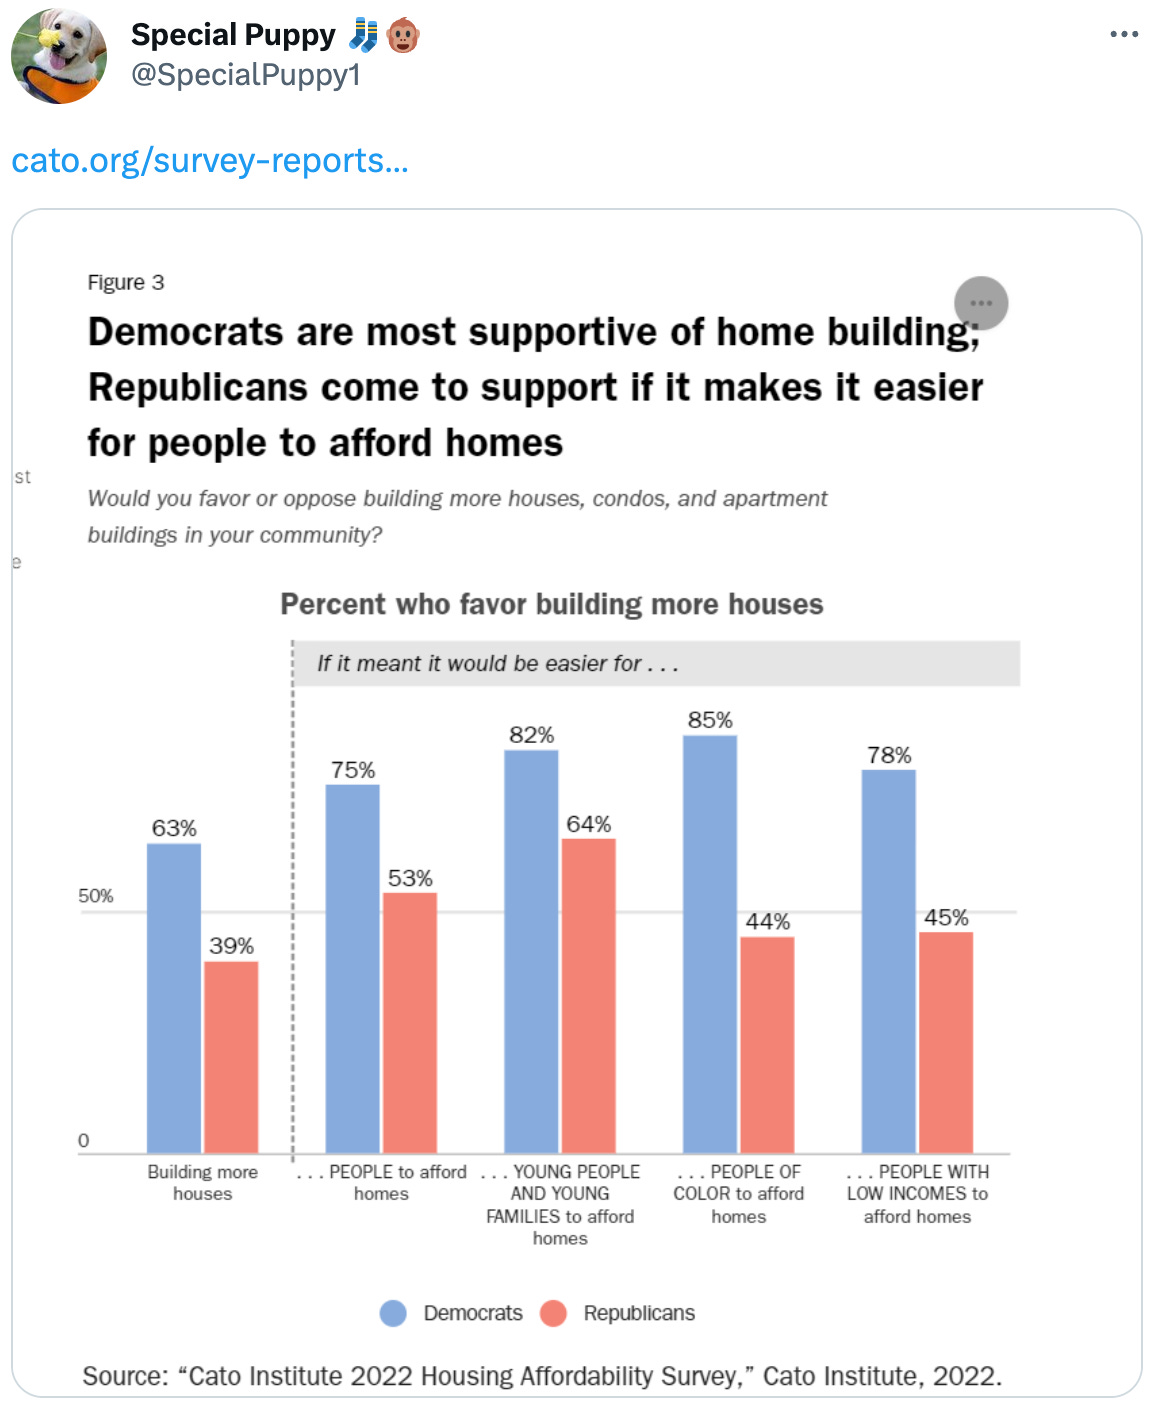  Special Puppy 🧦🐵 @SpecialPuppy1 · 10h Another poll finds that liberals and Democratic voters are more YIMBY than conservatives and Republican voters. https://echelonin.wpenginepowered.com/wp-content/uploads/May-2023-Omnibus-Crosstabs-EXTERNAL.pdf